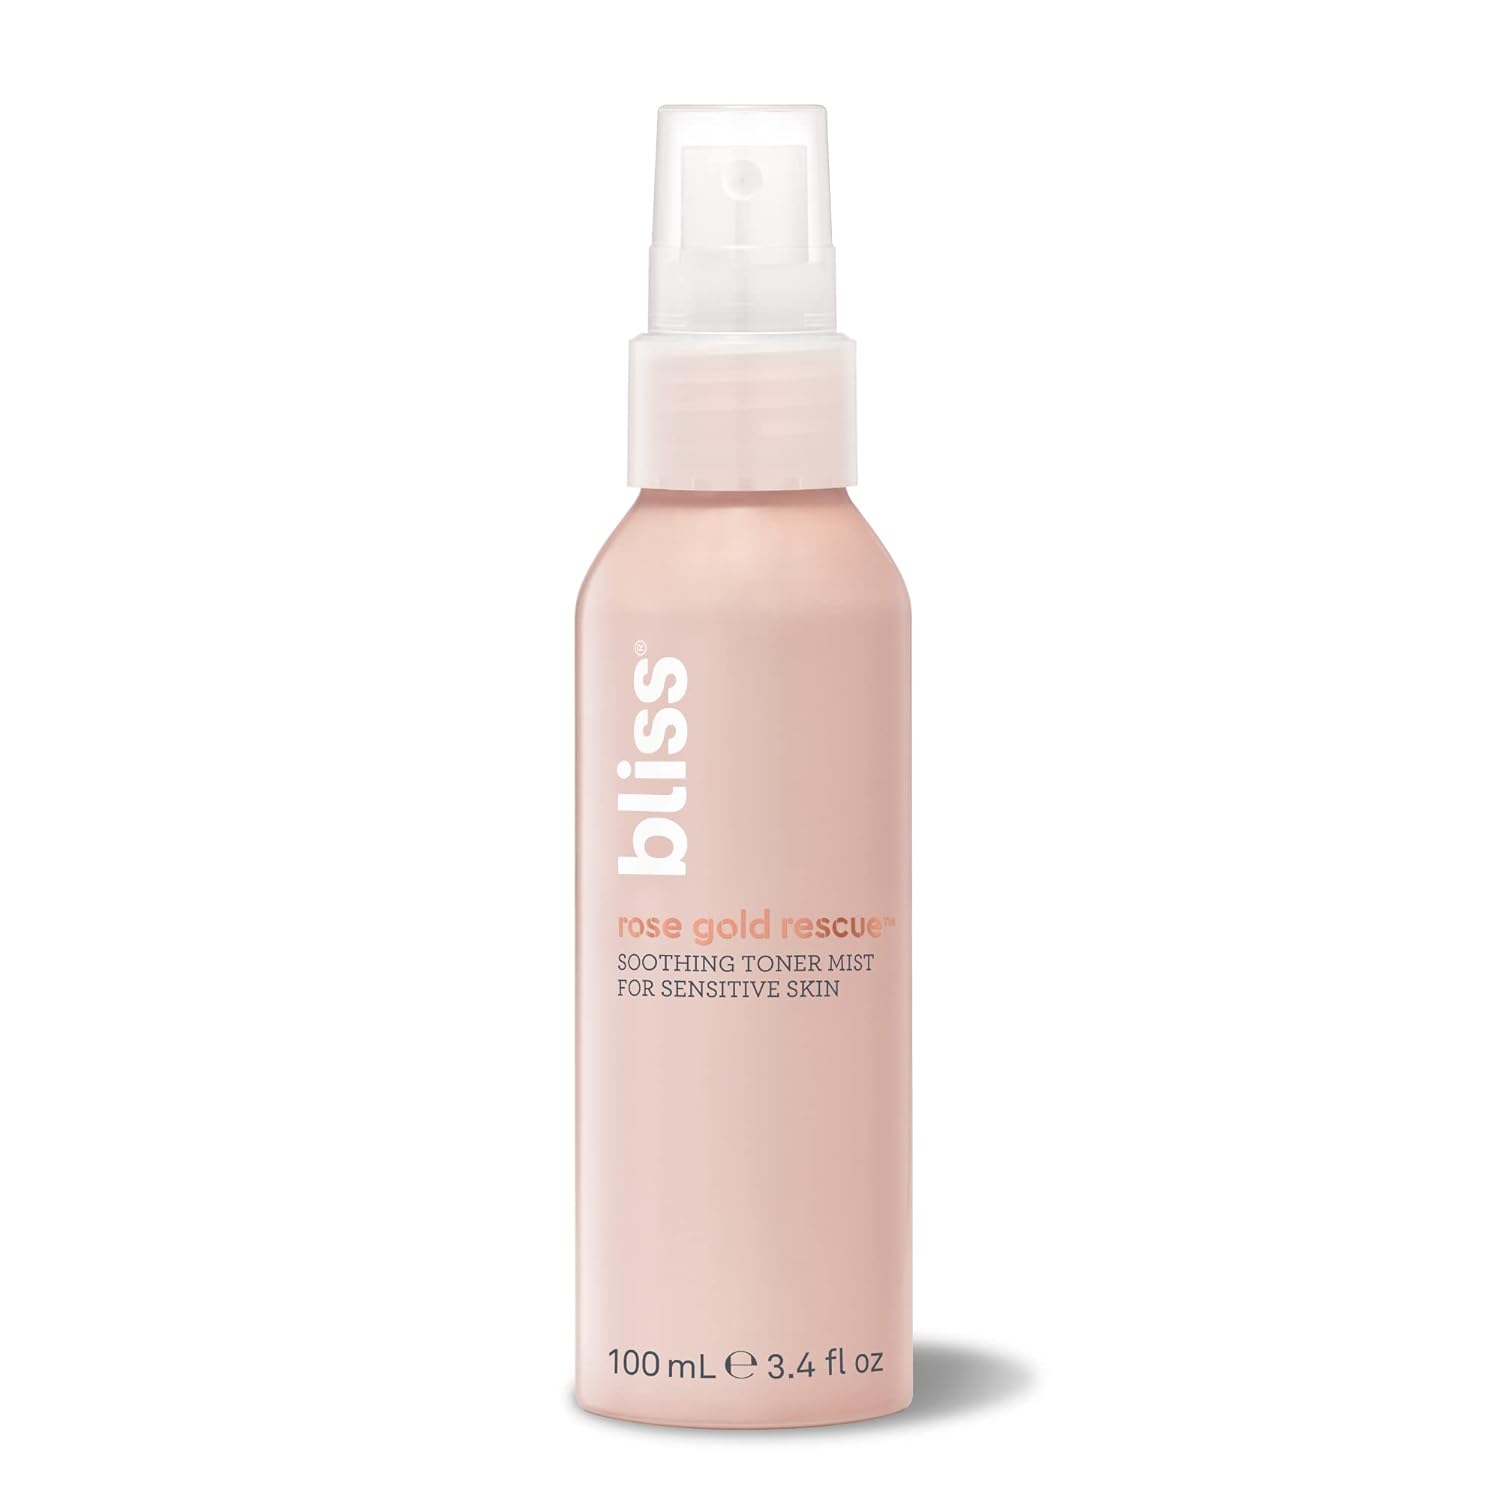 Bliss Rose Gold Rescue Toner Mist, Soothing & Refreshing Face Spray | Calming Rose Flower Water & Nourishing Colloidal Gold for Sensitive Skin | Clean | Cruelty-Free | Paraben Free | Vegan | 3.4 oz